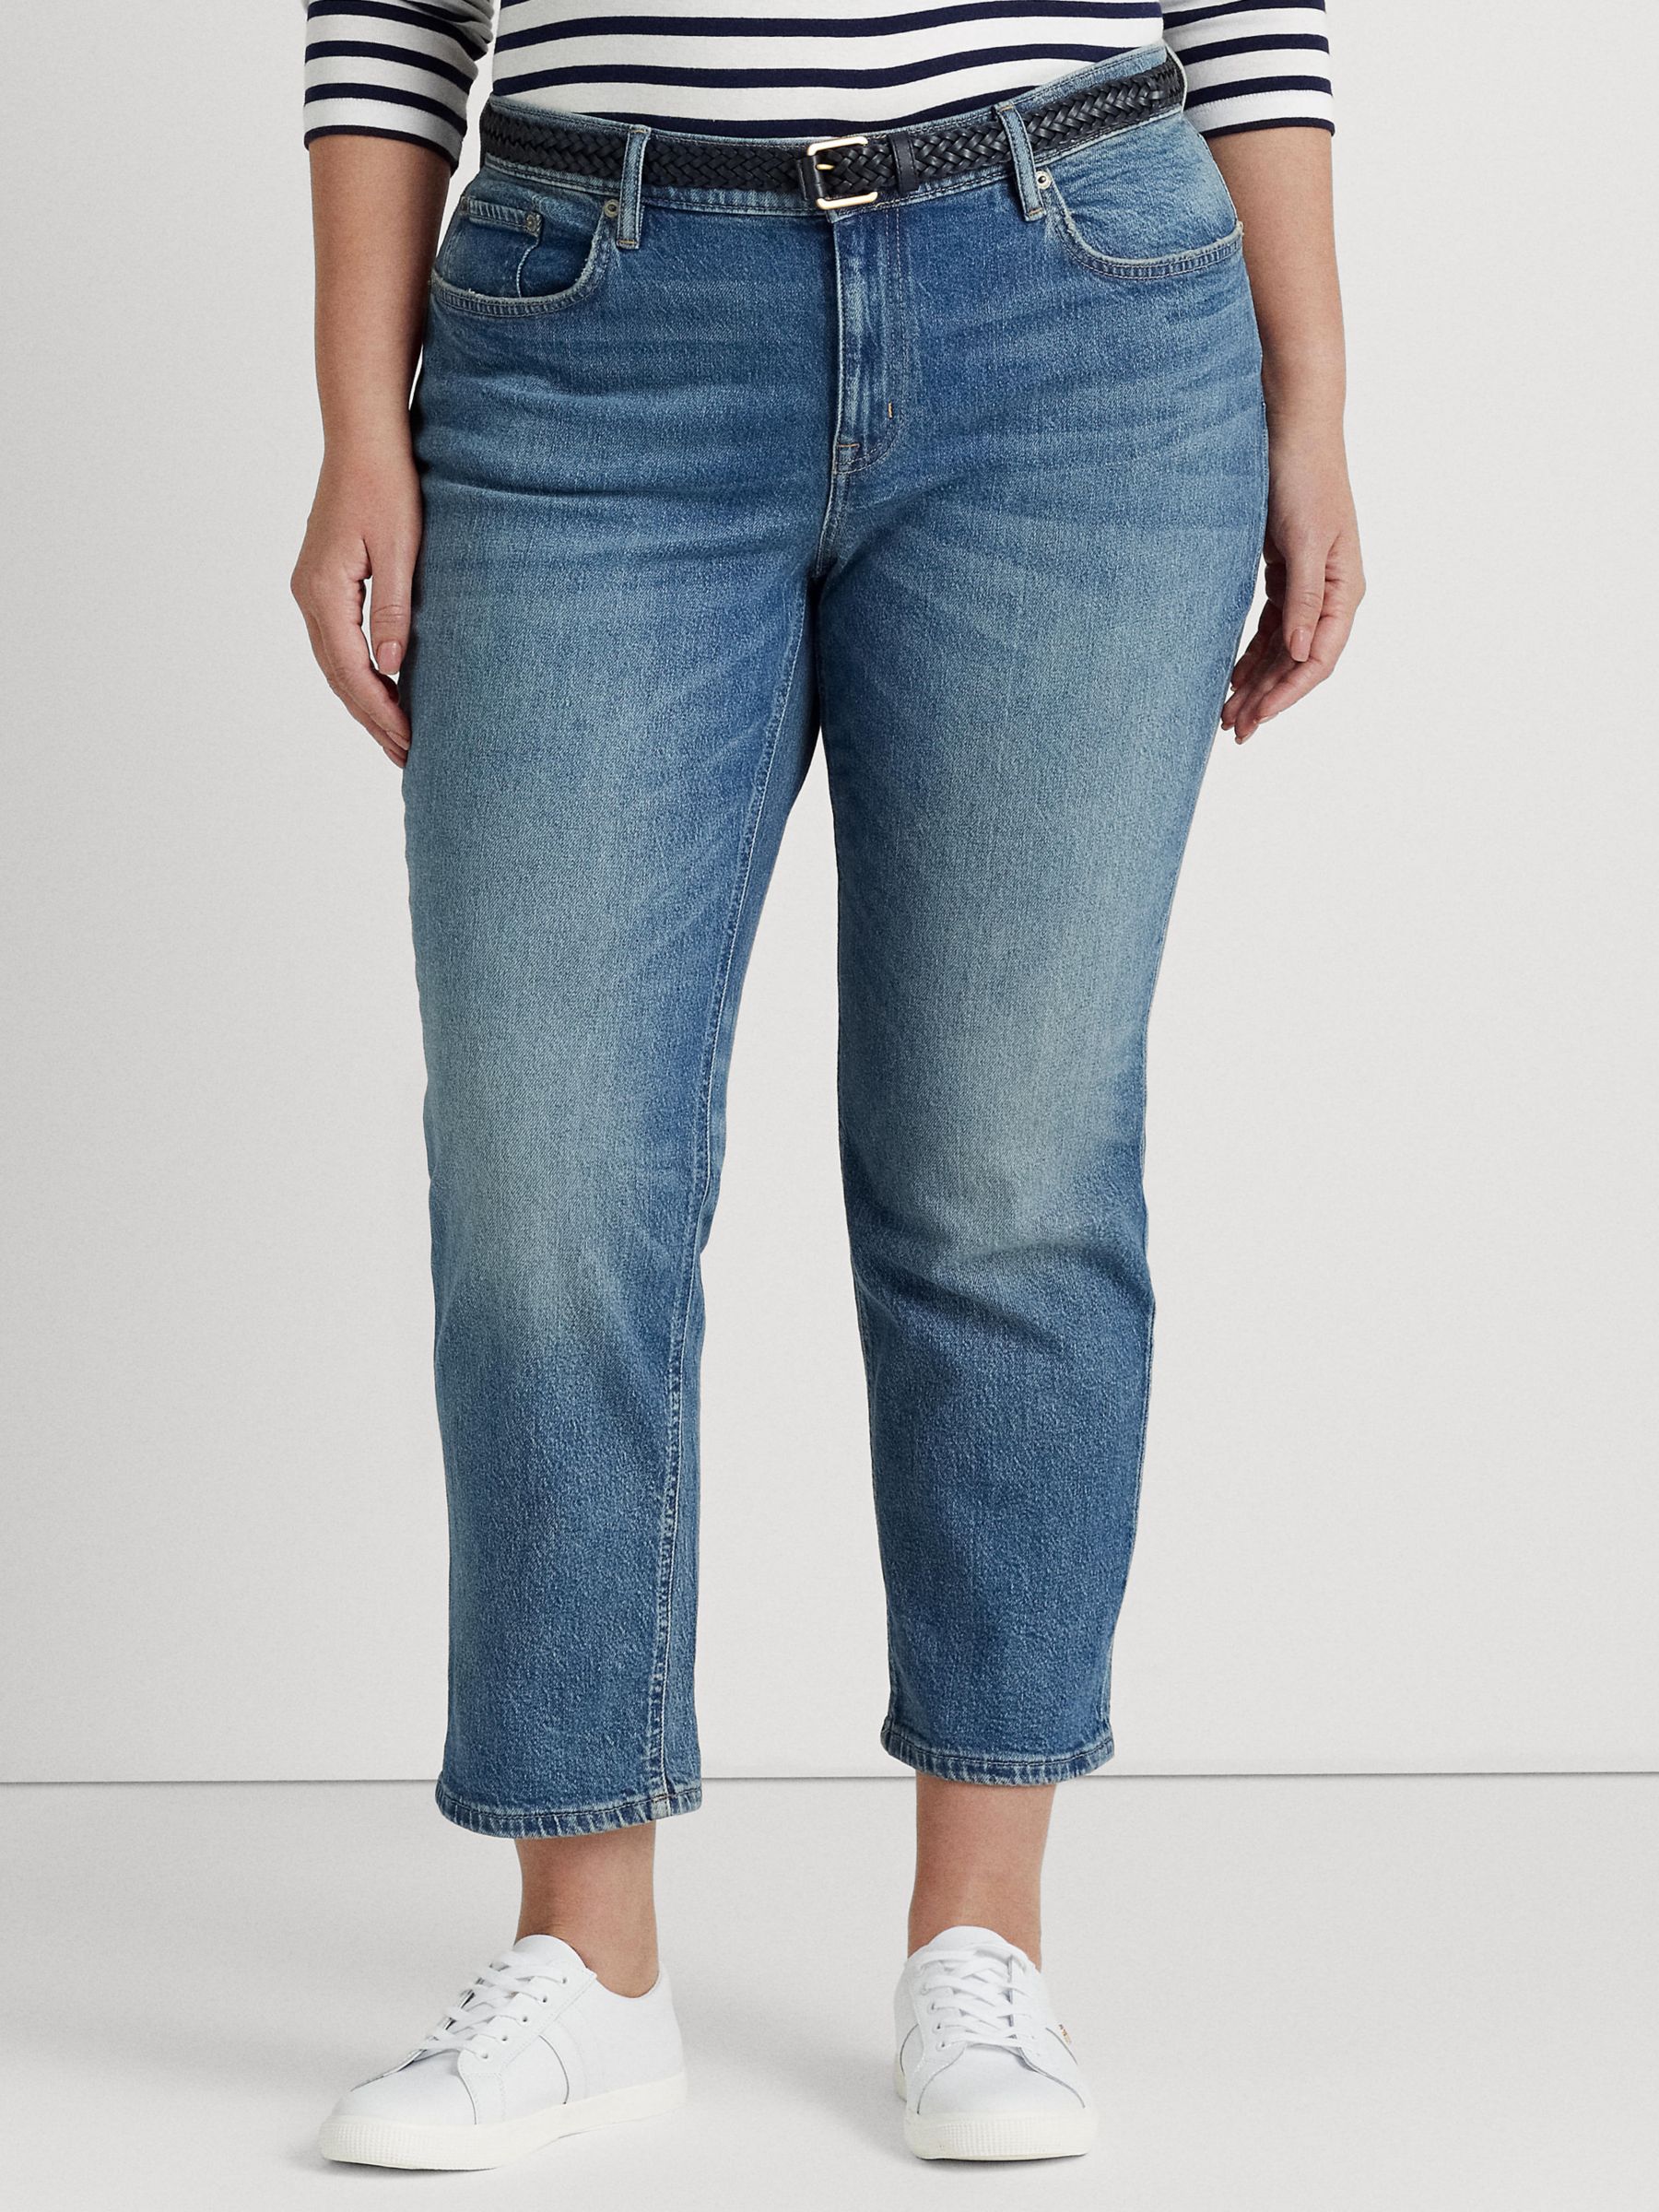 Lauren Ralph Lauren Curve Relaxed Tapered Cropped Jeans, Rangeland Wash